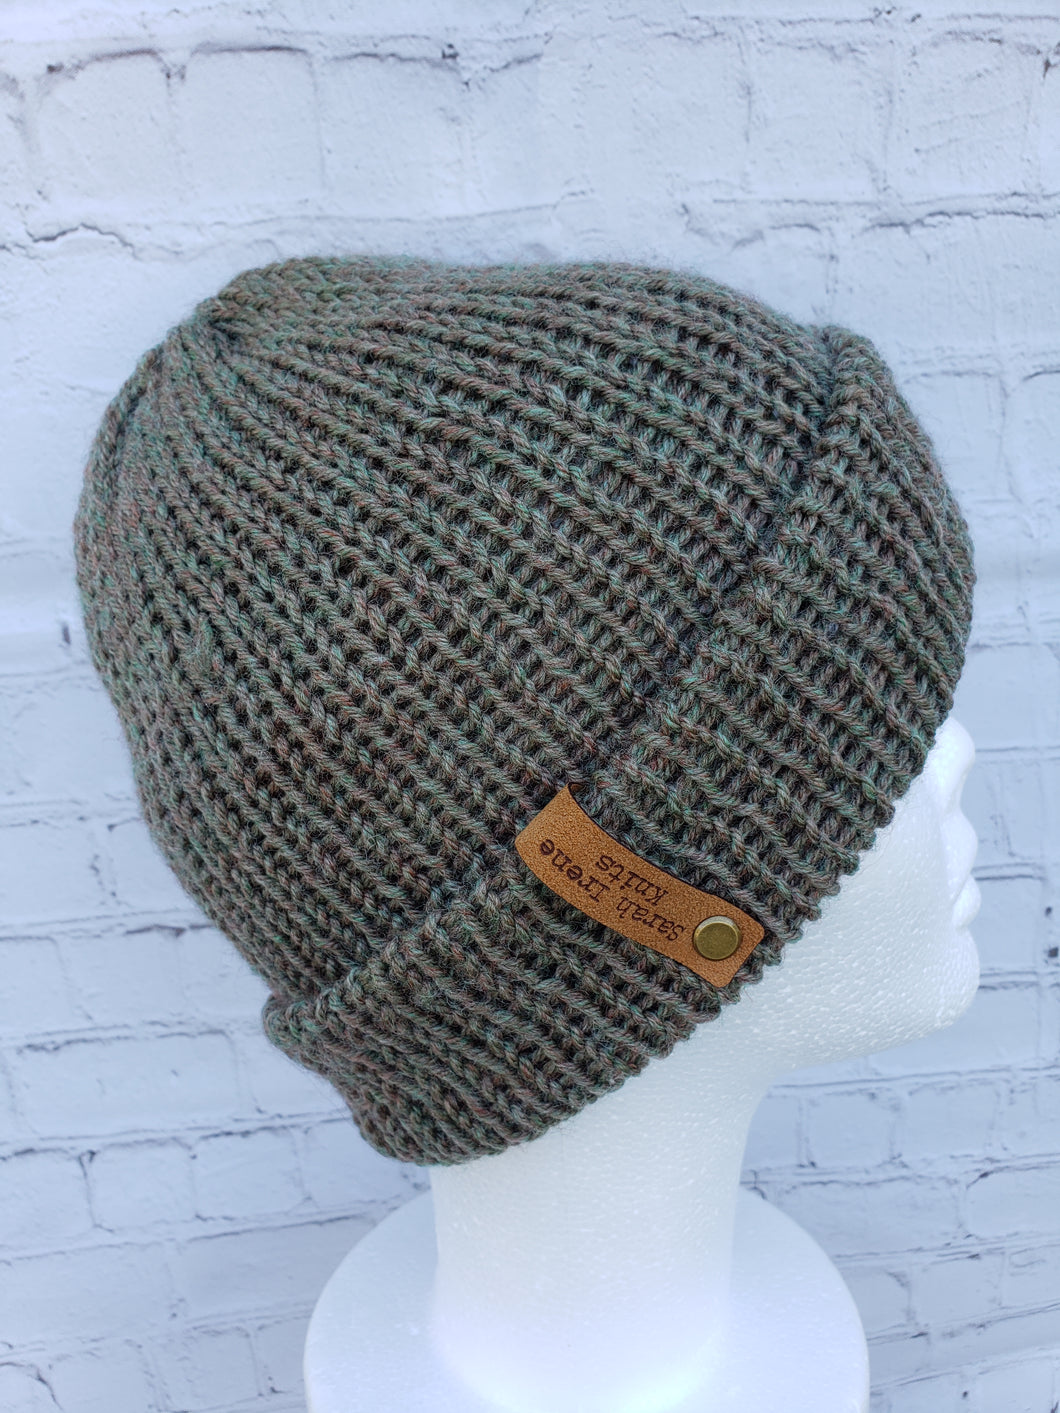 Double brim beanie in light green with speckles of tan and red. No pom.